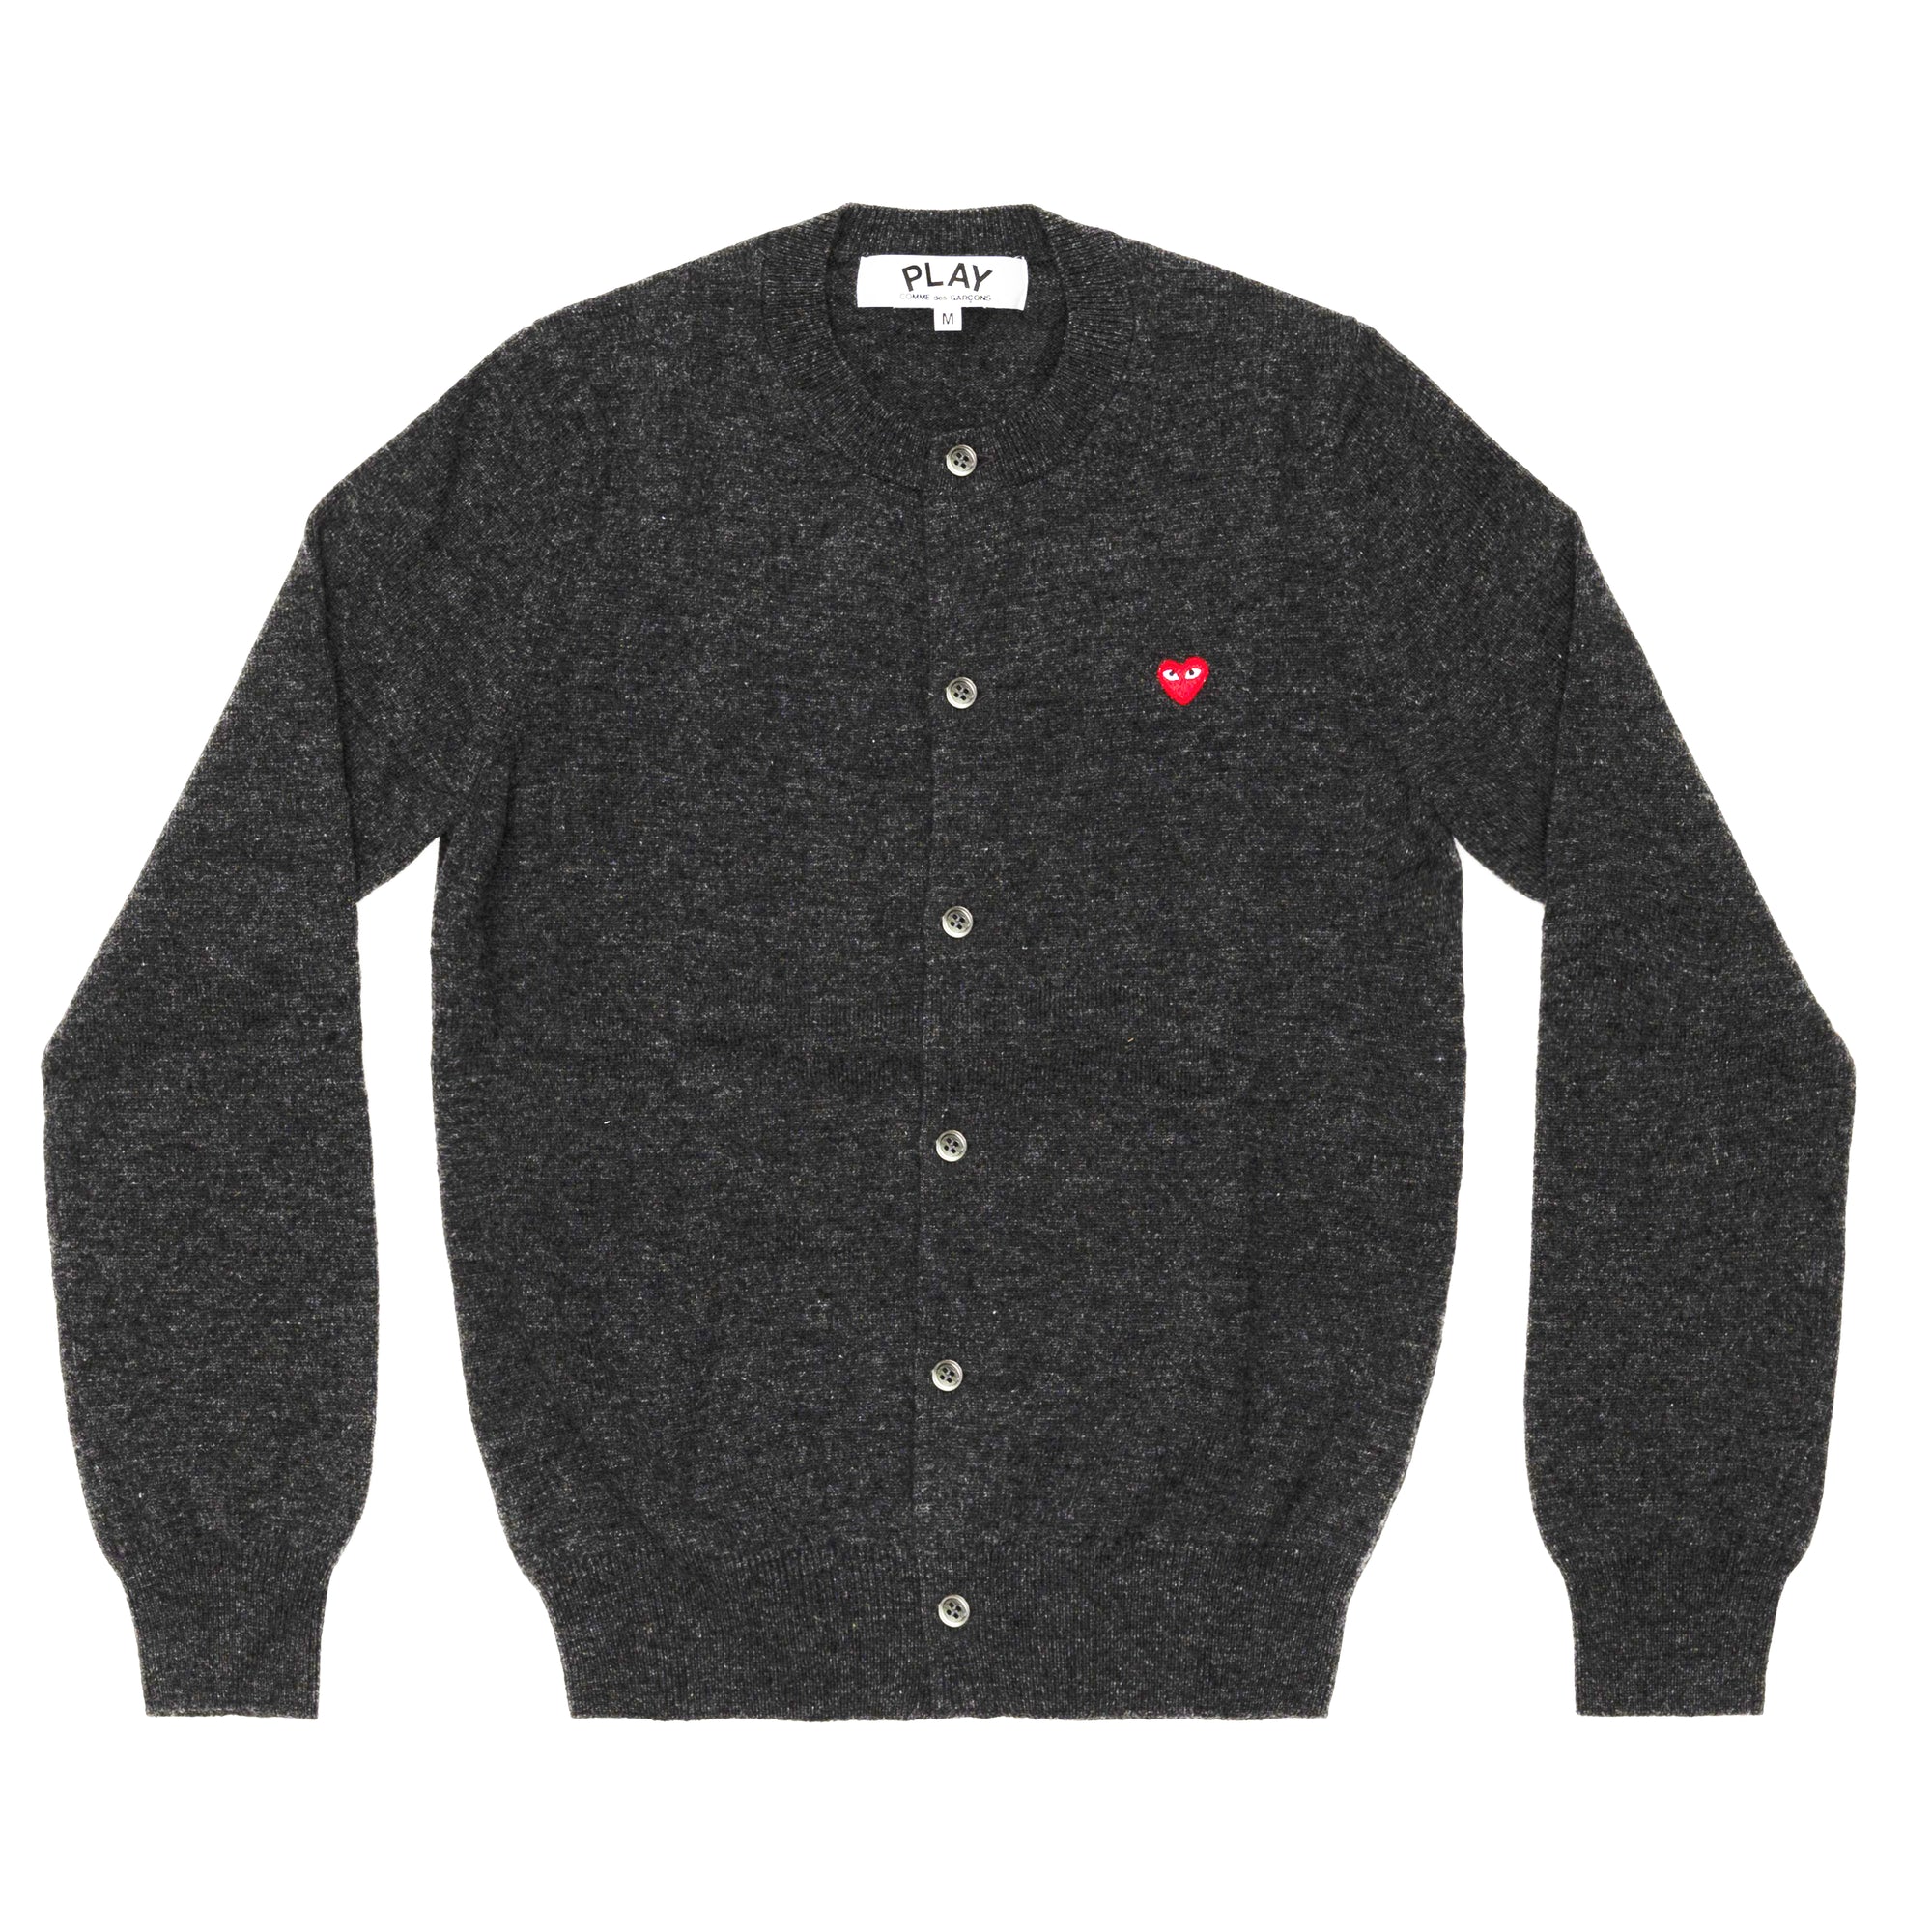 PLAY CDG - LADIES' CARDIGAN WITH SMALL RED HEART - (CHARCOAL GREY) view 1